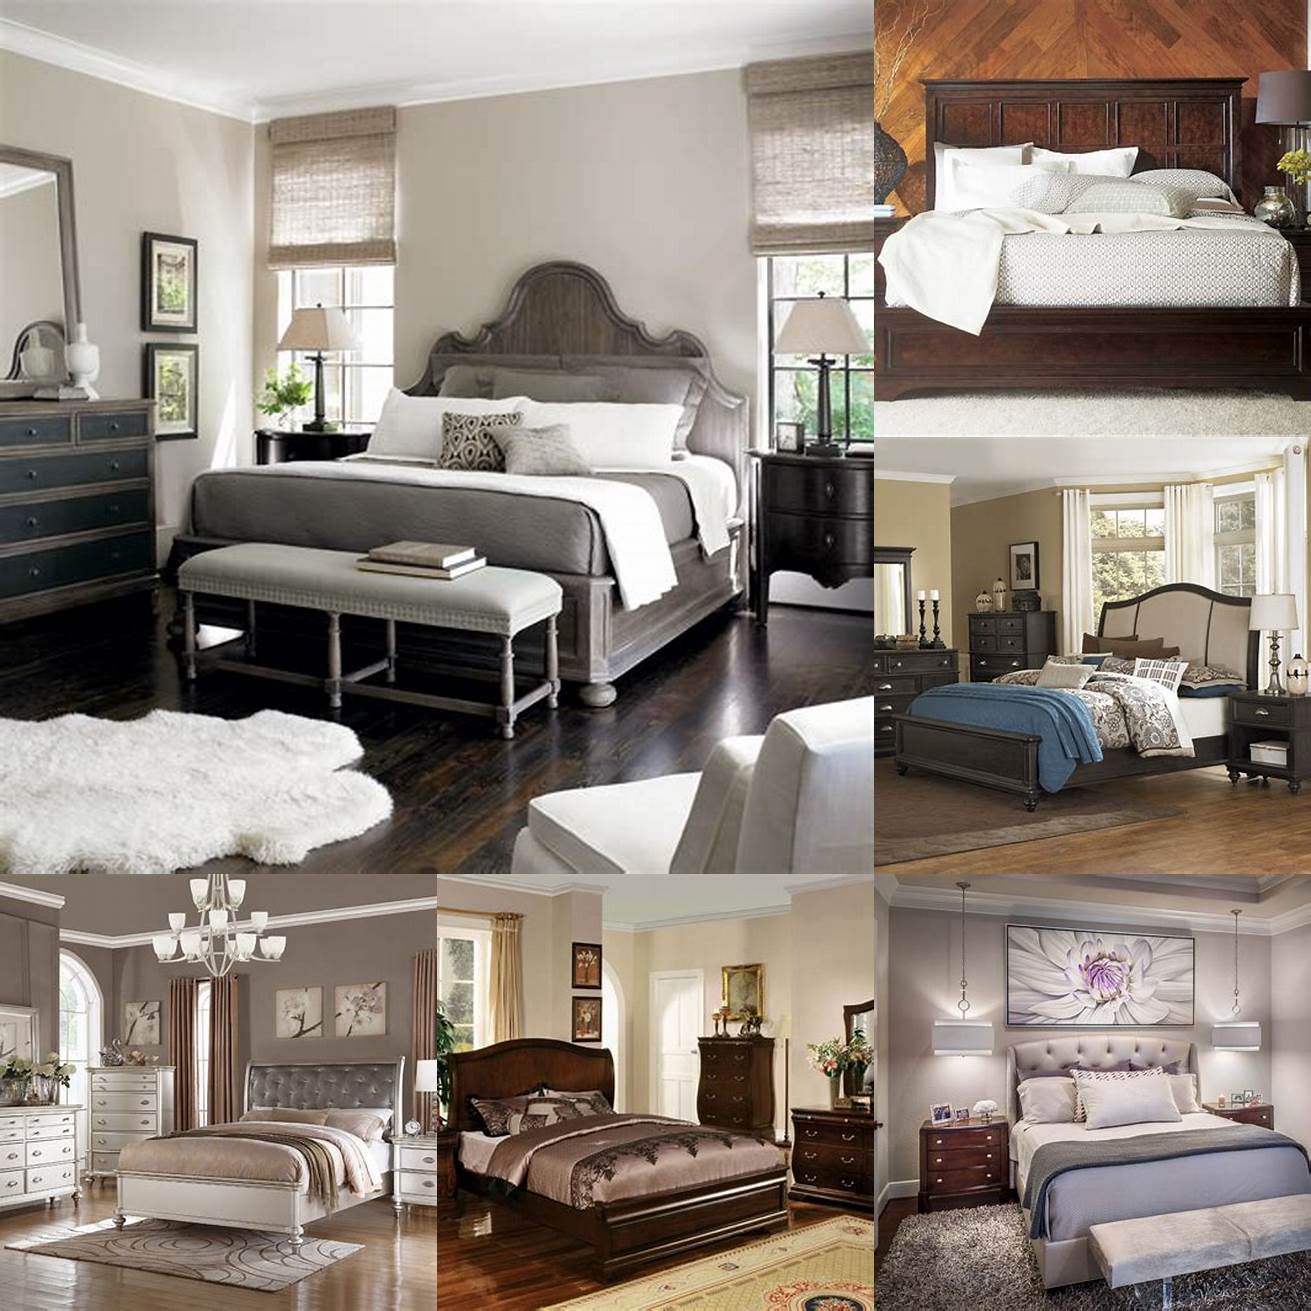 A Transitional Bedroom